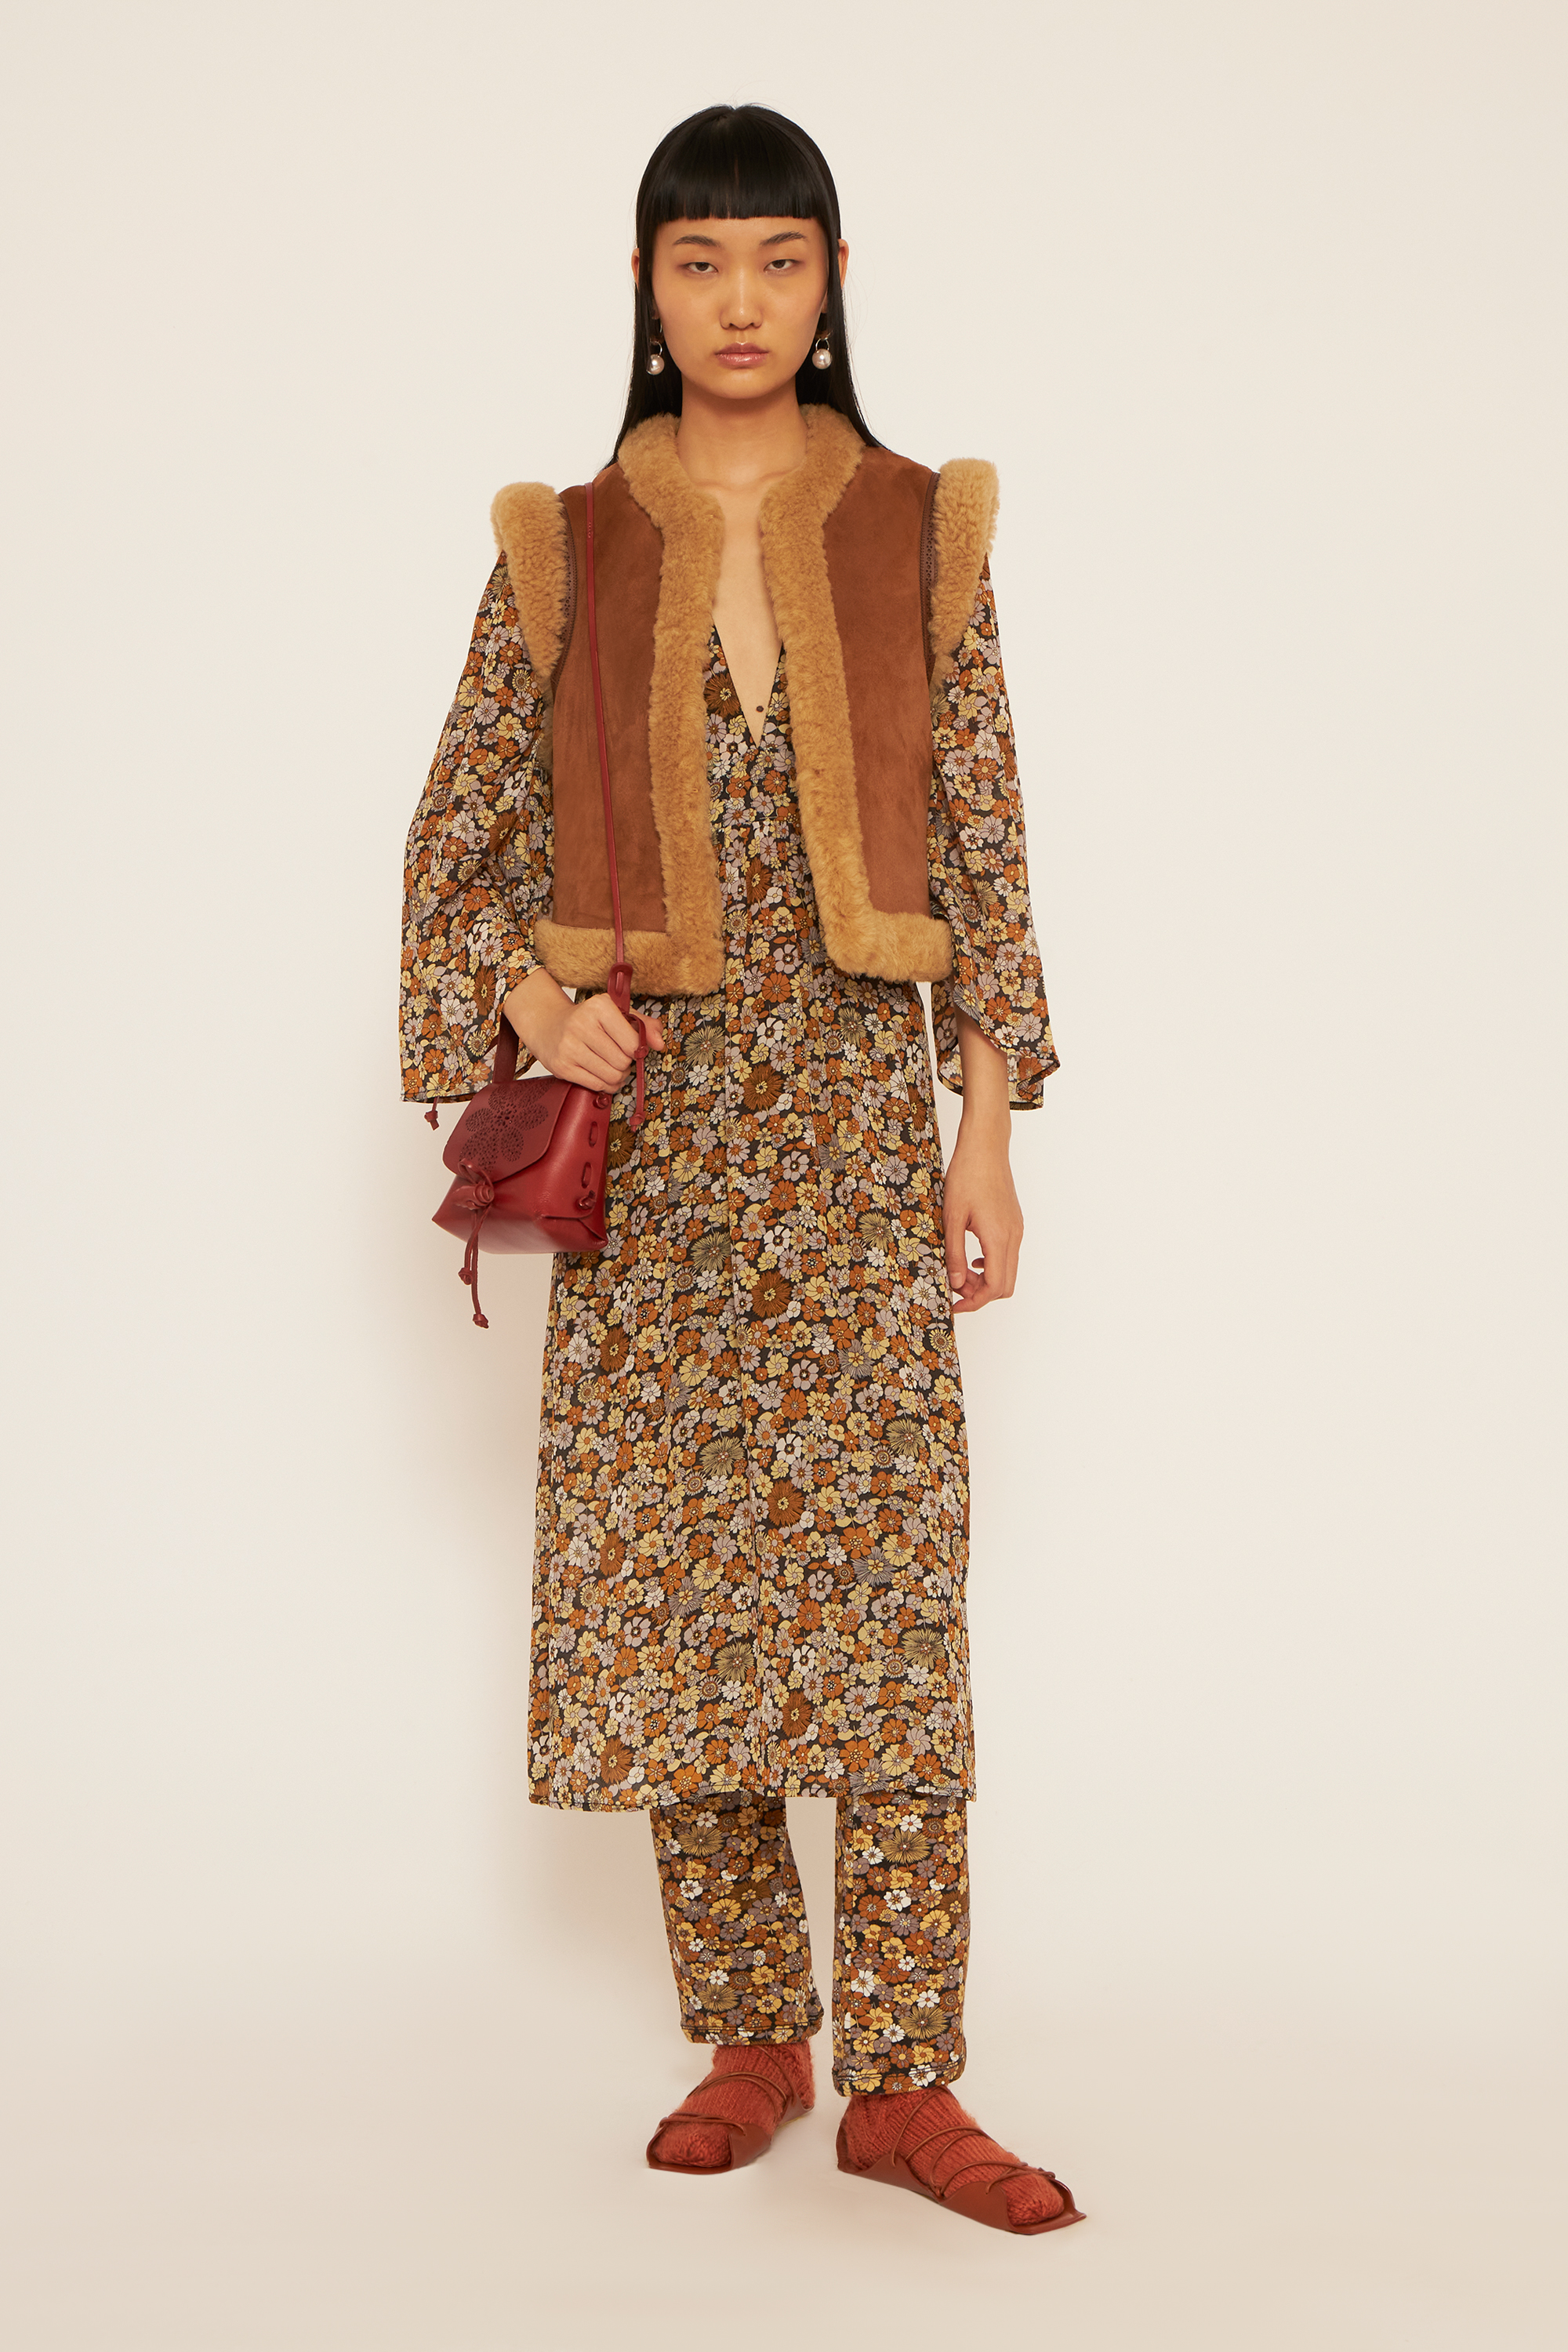 A girl wearing a fur gilet, a flower printed longdress, a flower printed leggings and socks with sandals.